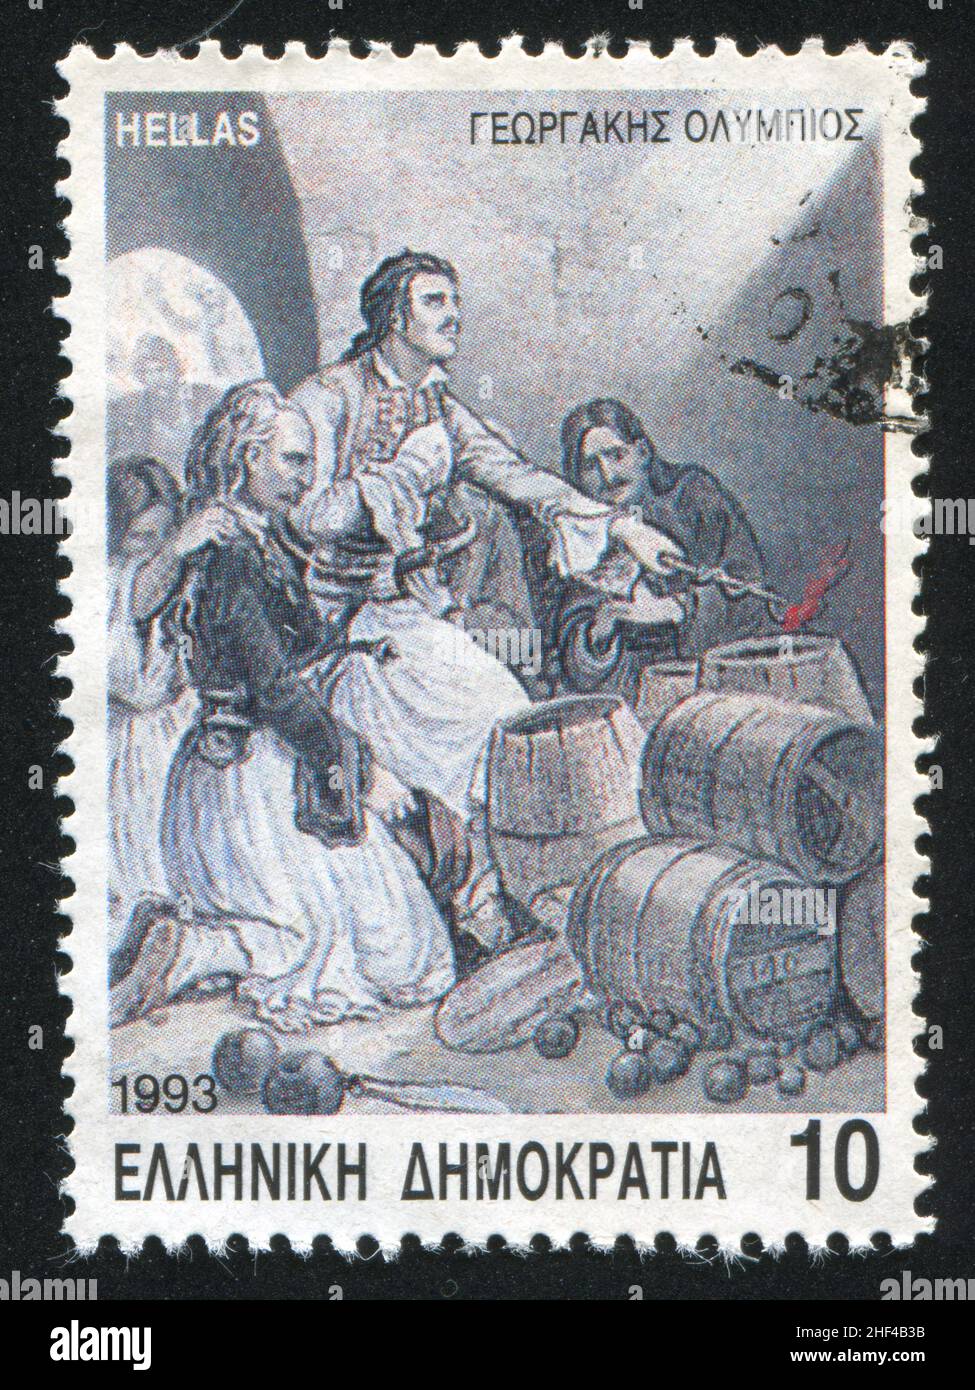 GREECE - CIRCA 1993: stamp printed by Greece, shows Death of Georgakis Olympios, circa 1993 Stock Photo